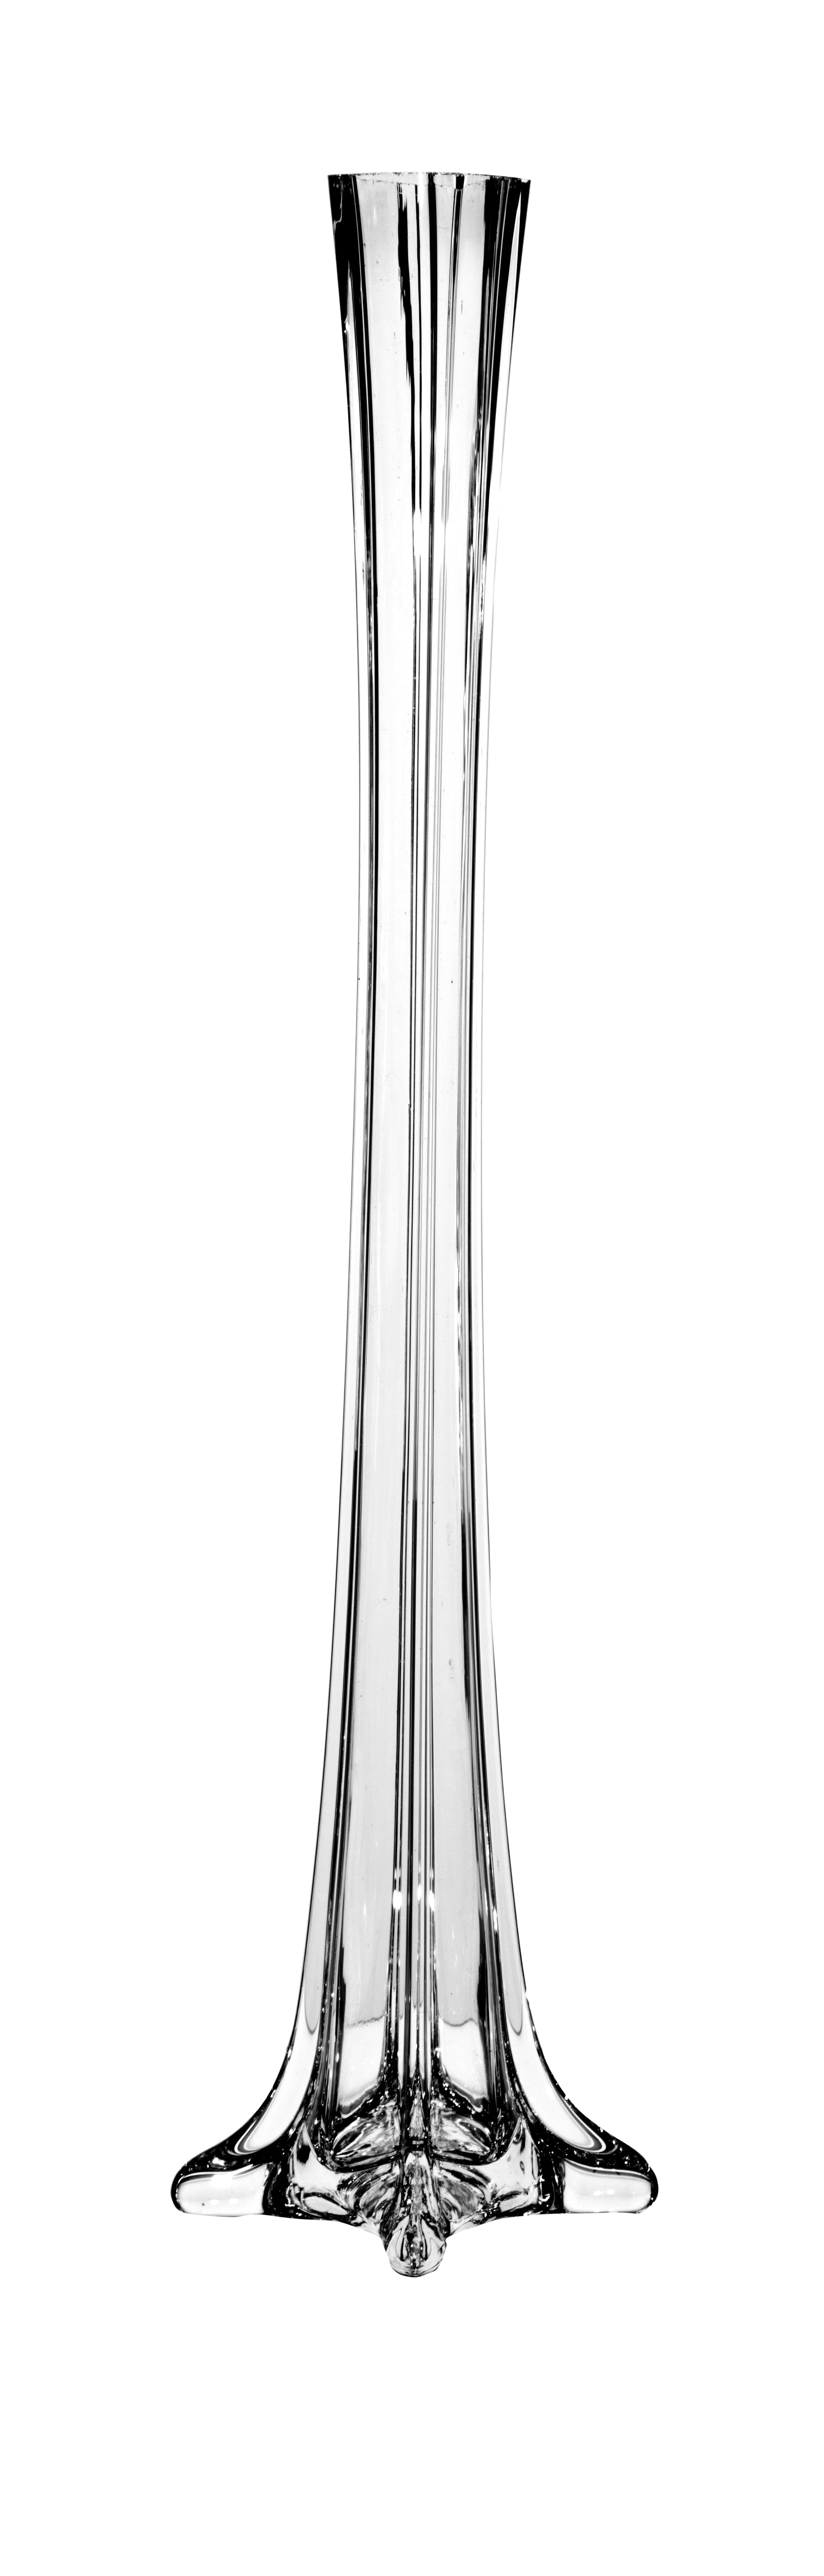 category_C1225 - Tall Glass Vase